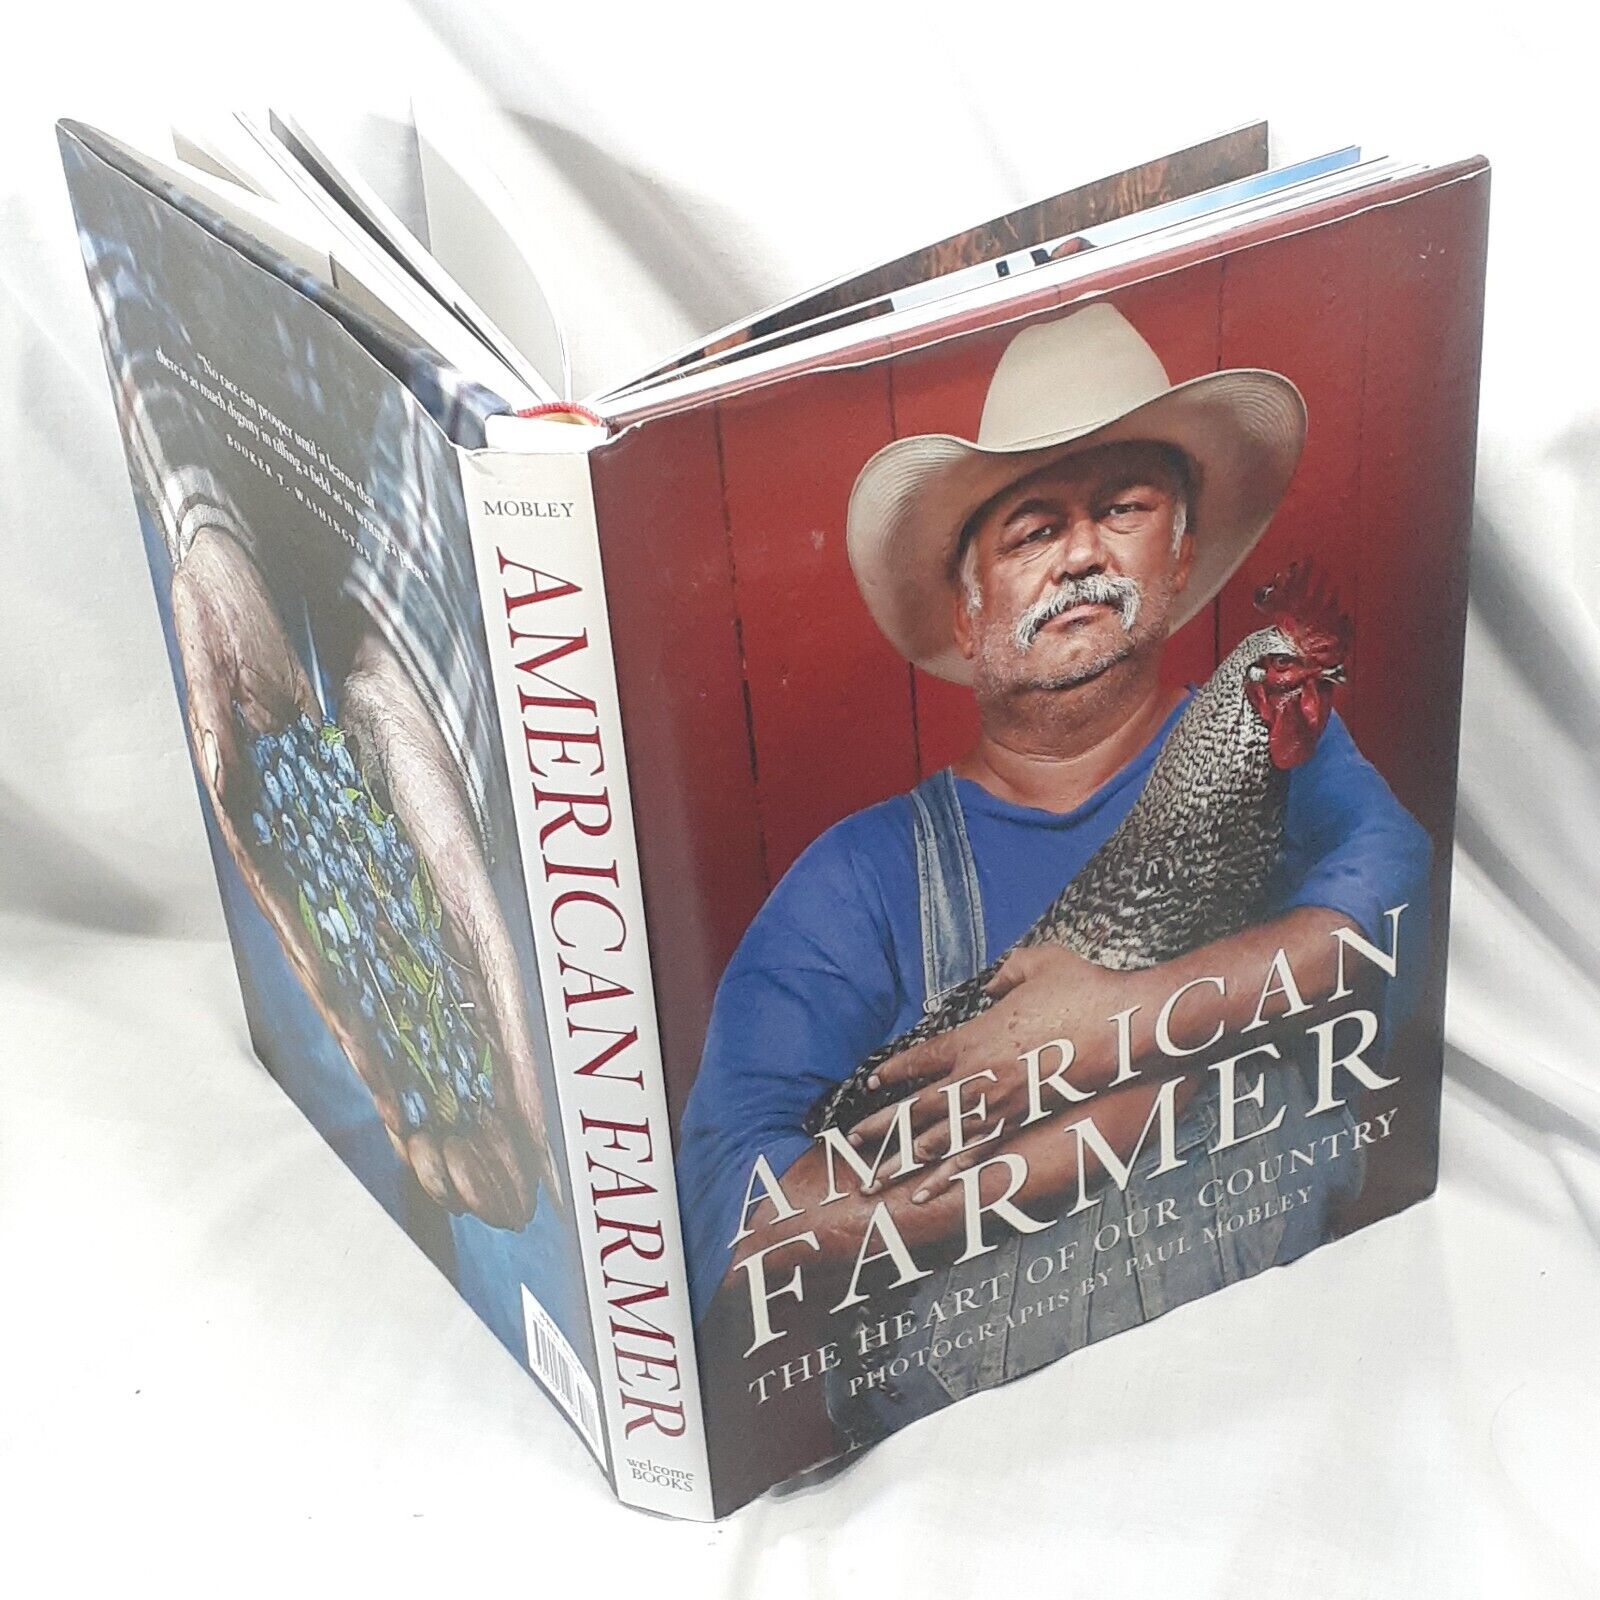 The American Farmer The Heart of Our Country Paul Mobley Crops 2015 Hardcover DJ